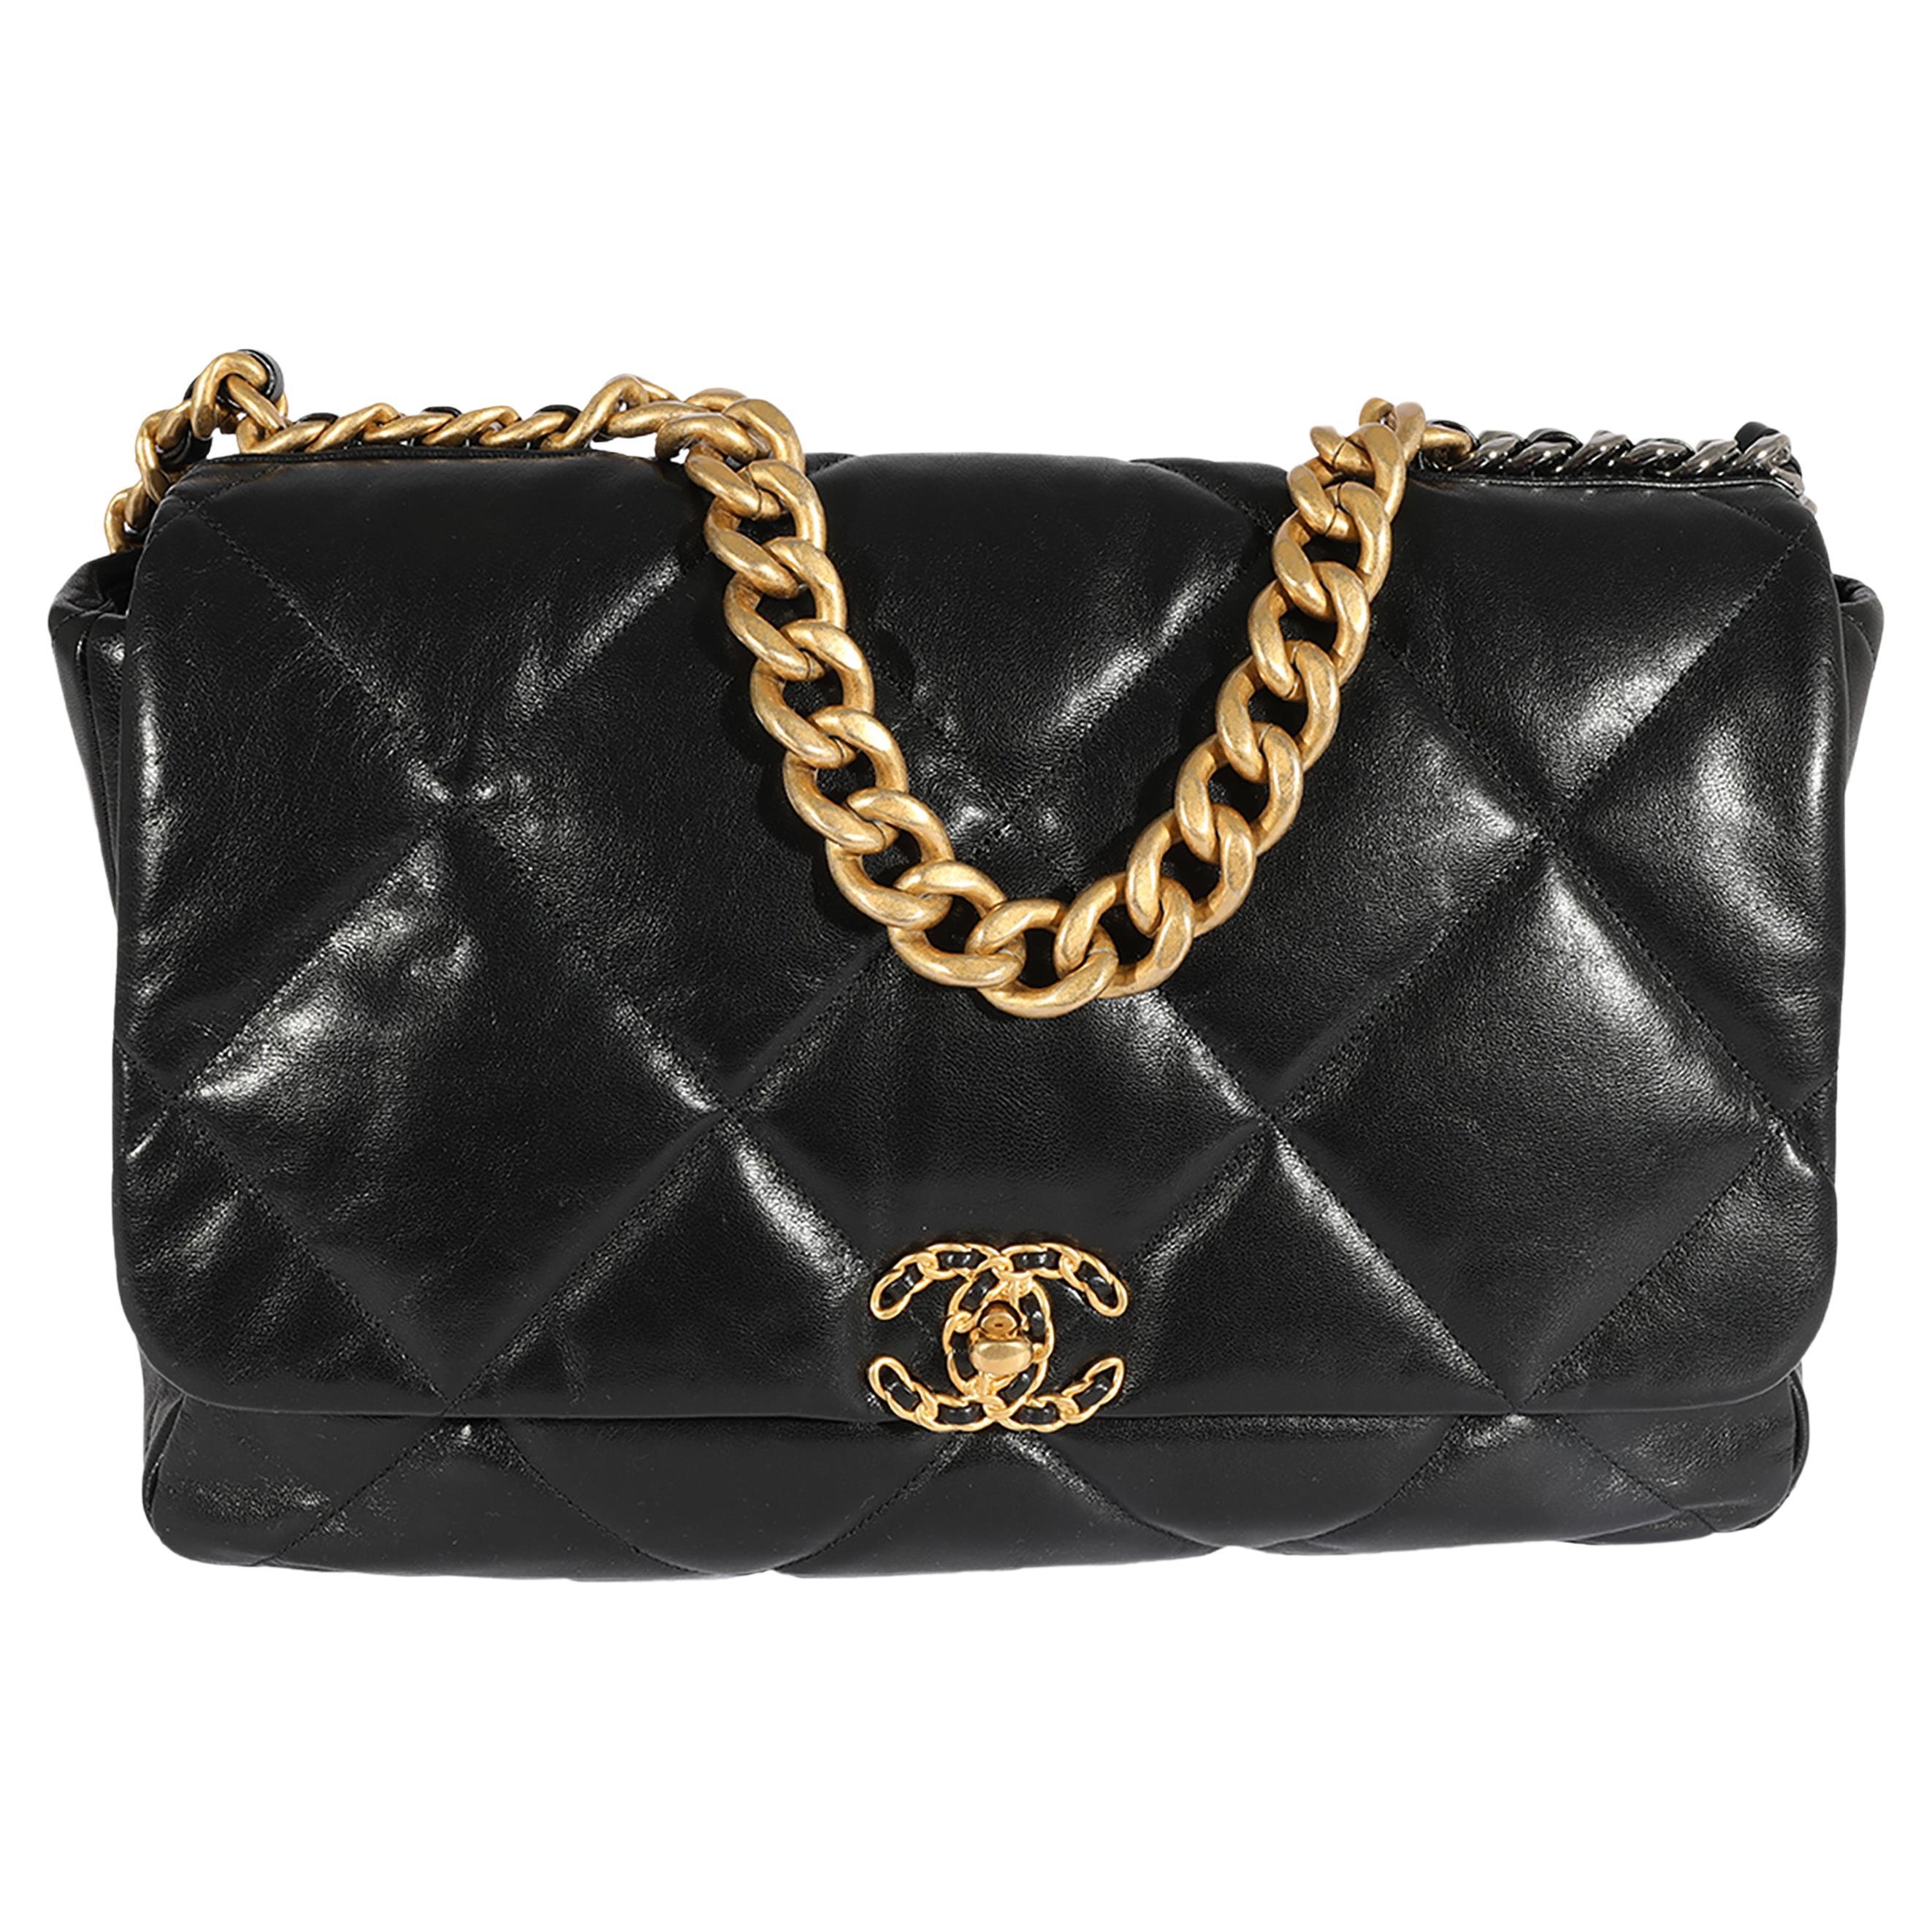 Chanel Black Quilted Lambskin 19 Maxi Flap Bag